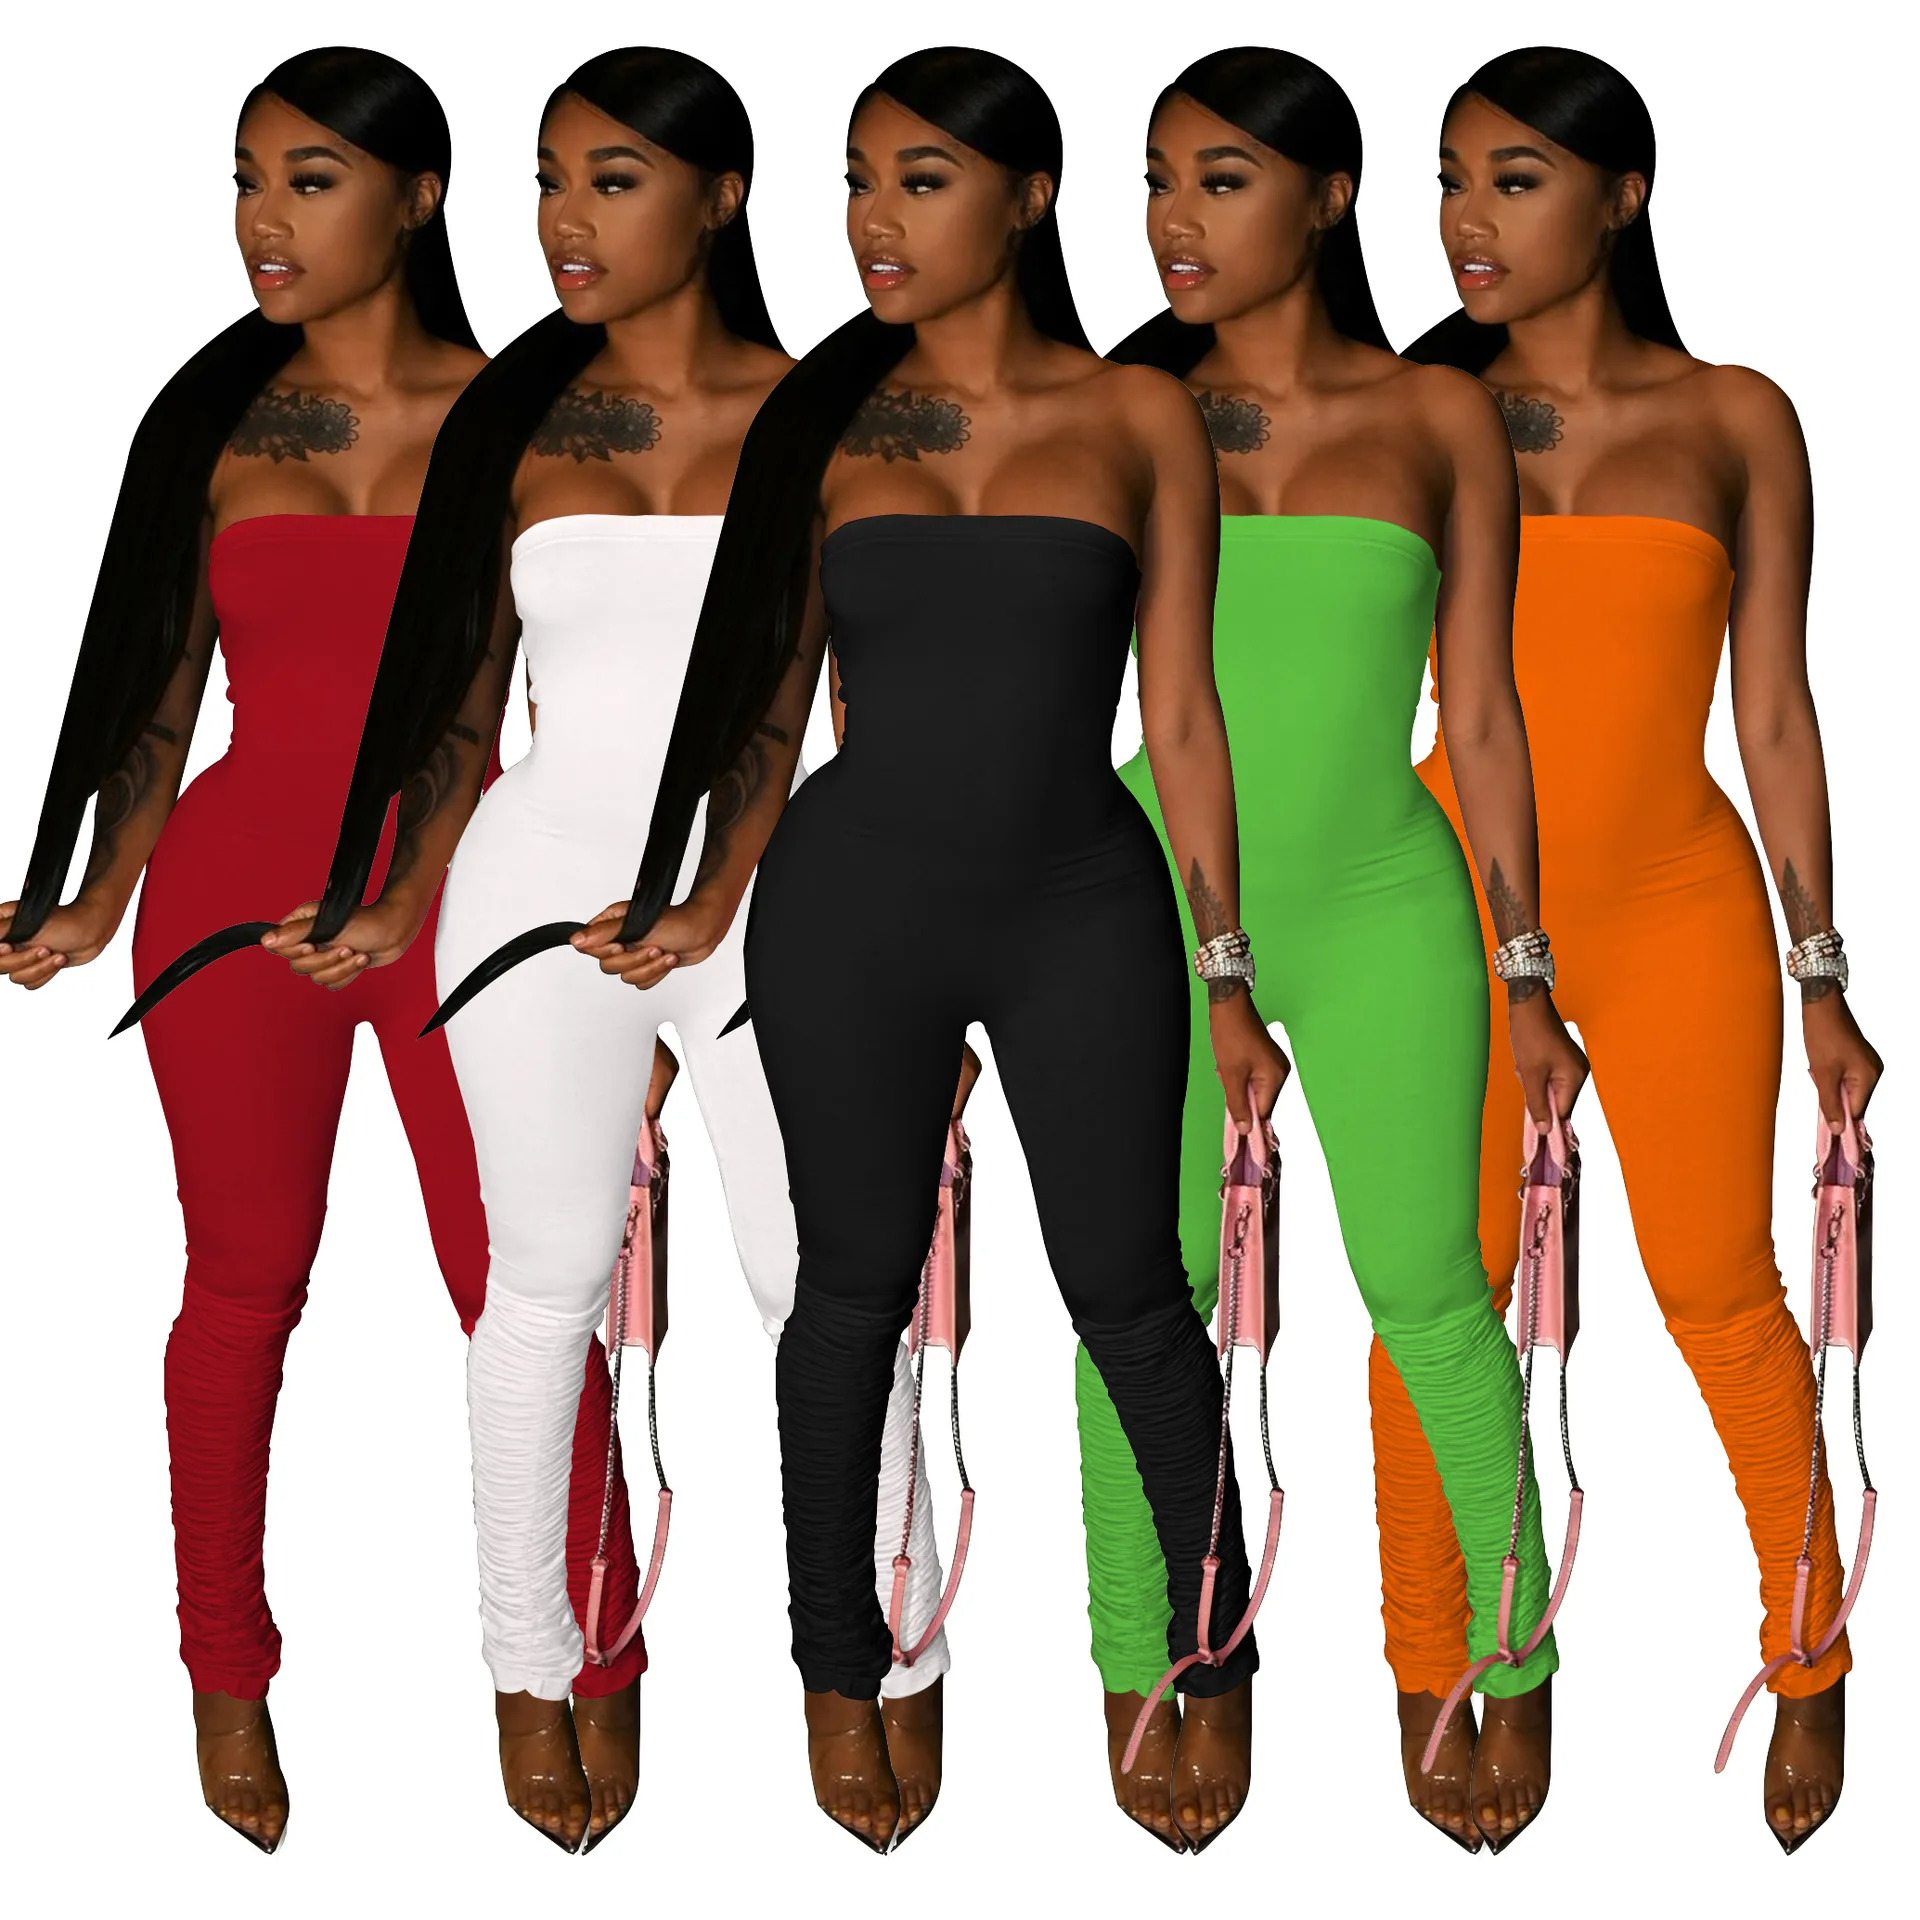 

DUODUOCOLOR Solid color fashion strapless rompers women clothing sexy club jumpsuits women 2021 elegant D10559, White, orange, red, black, fluorescent green